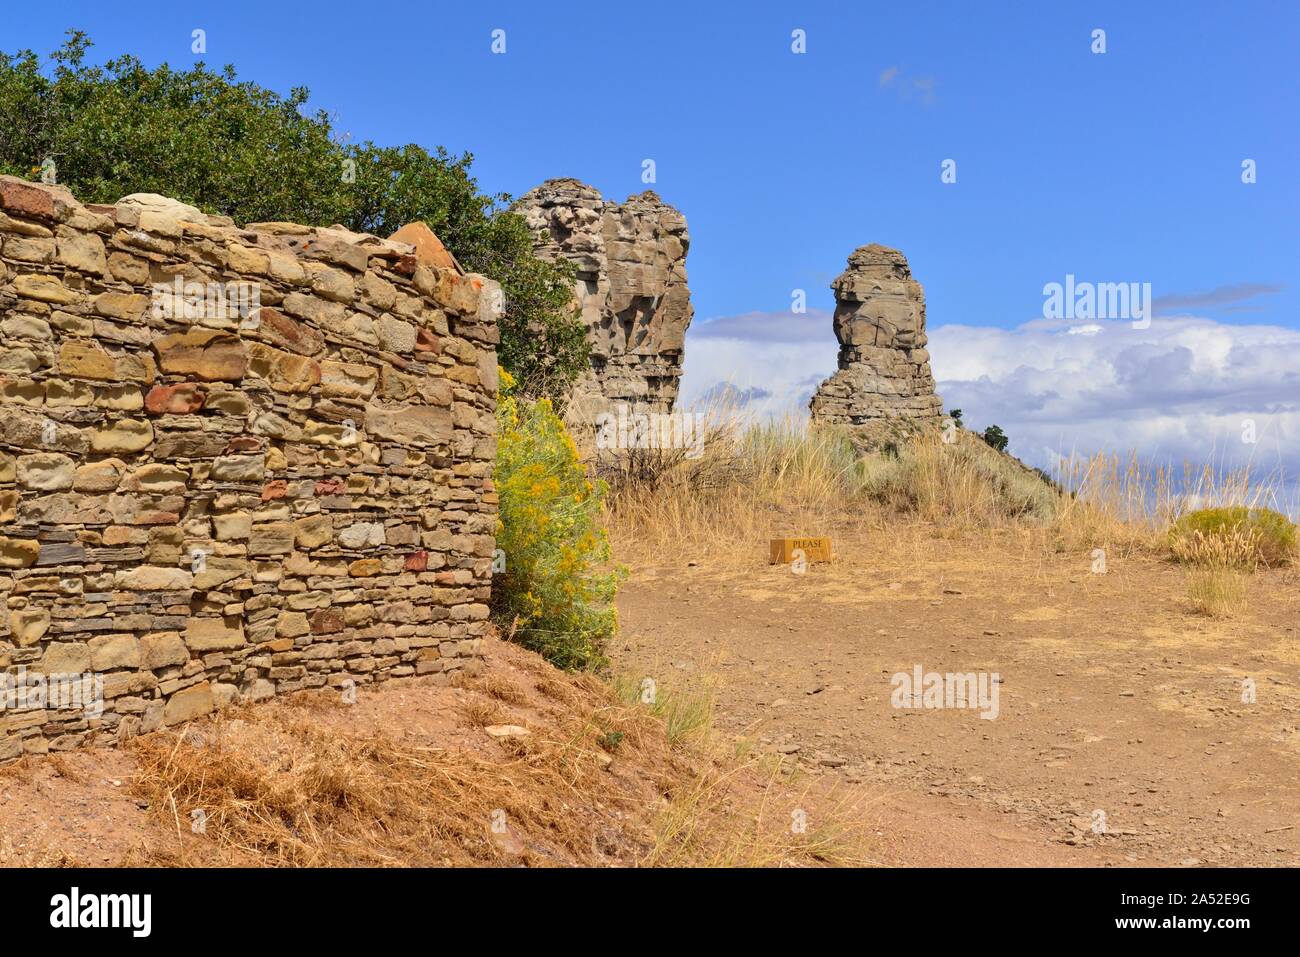 Chacoan room block wall, Chimney Rock and Companion Rock, Chimney Rock National Monument, CO 190911 61304 Stock Photo